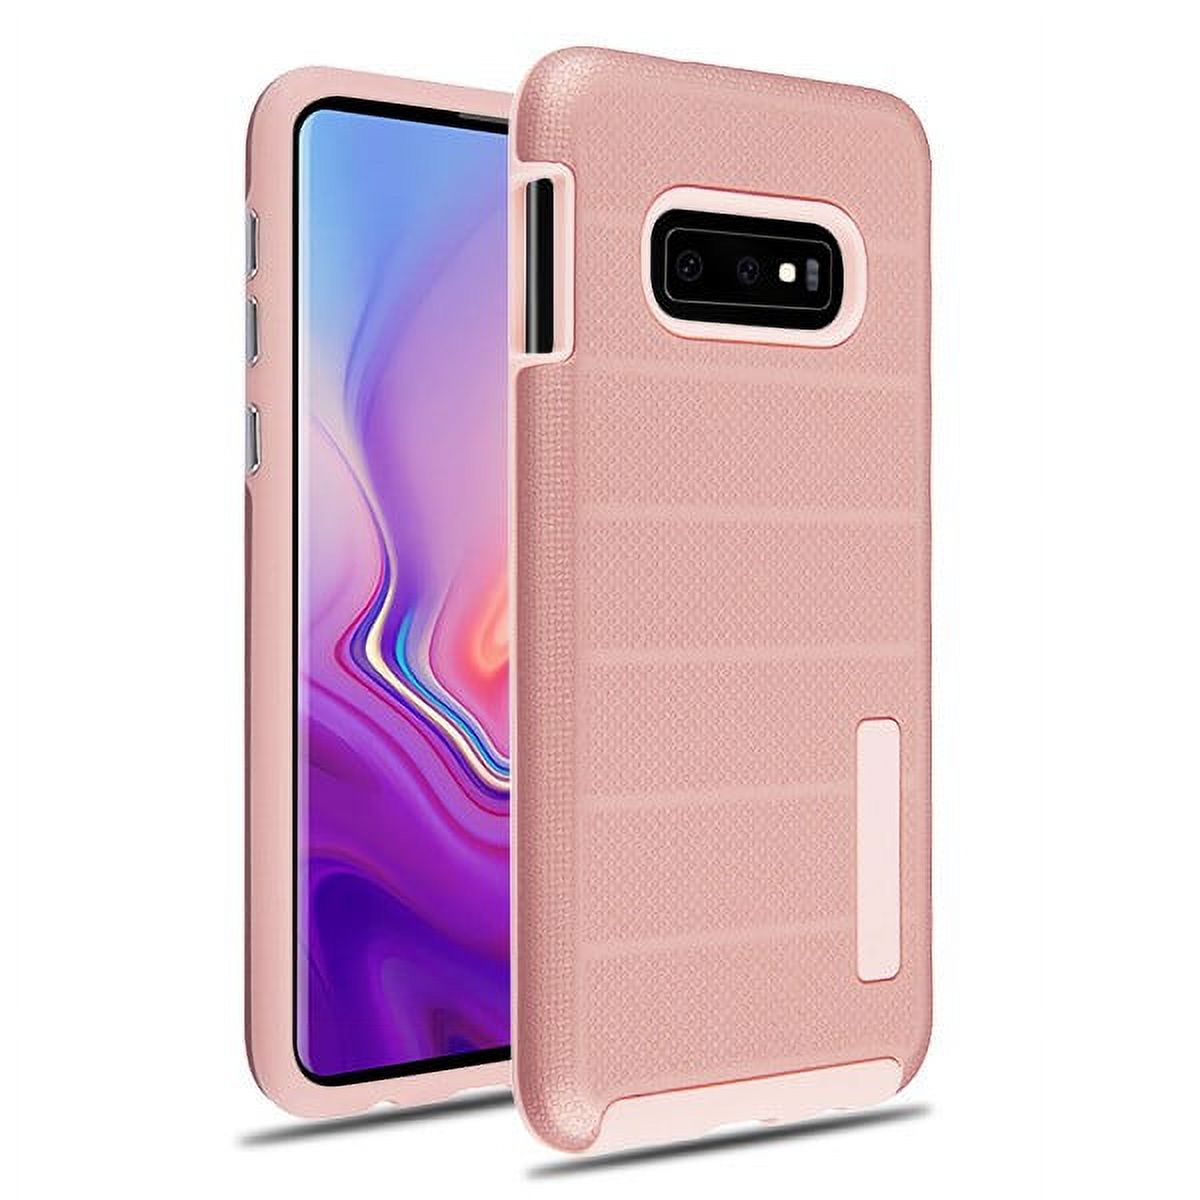 Samsung Galaxy S10e /S10 E Phone Case Protective Shockproof Dots Textured Armor Hybrid Rubber Rugged Silicone TPU Cover Rose Gold Slim Phone Case Cover for Samsung Galaxy S10 E, Galaxy S10e (5.8") - image 1 of 1